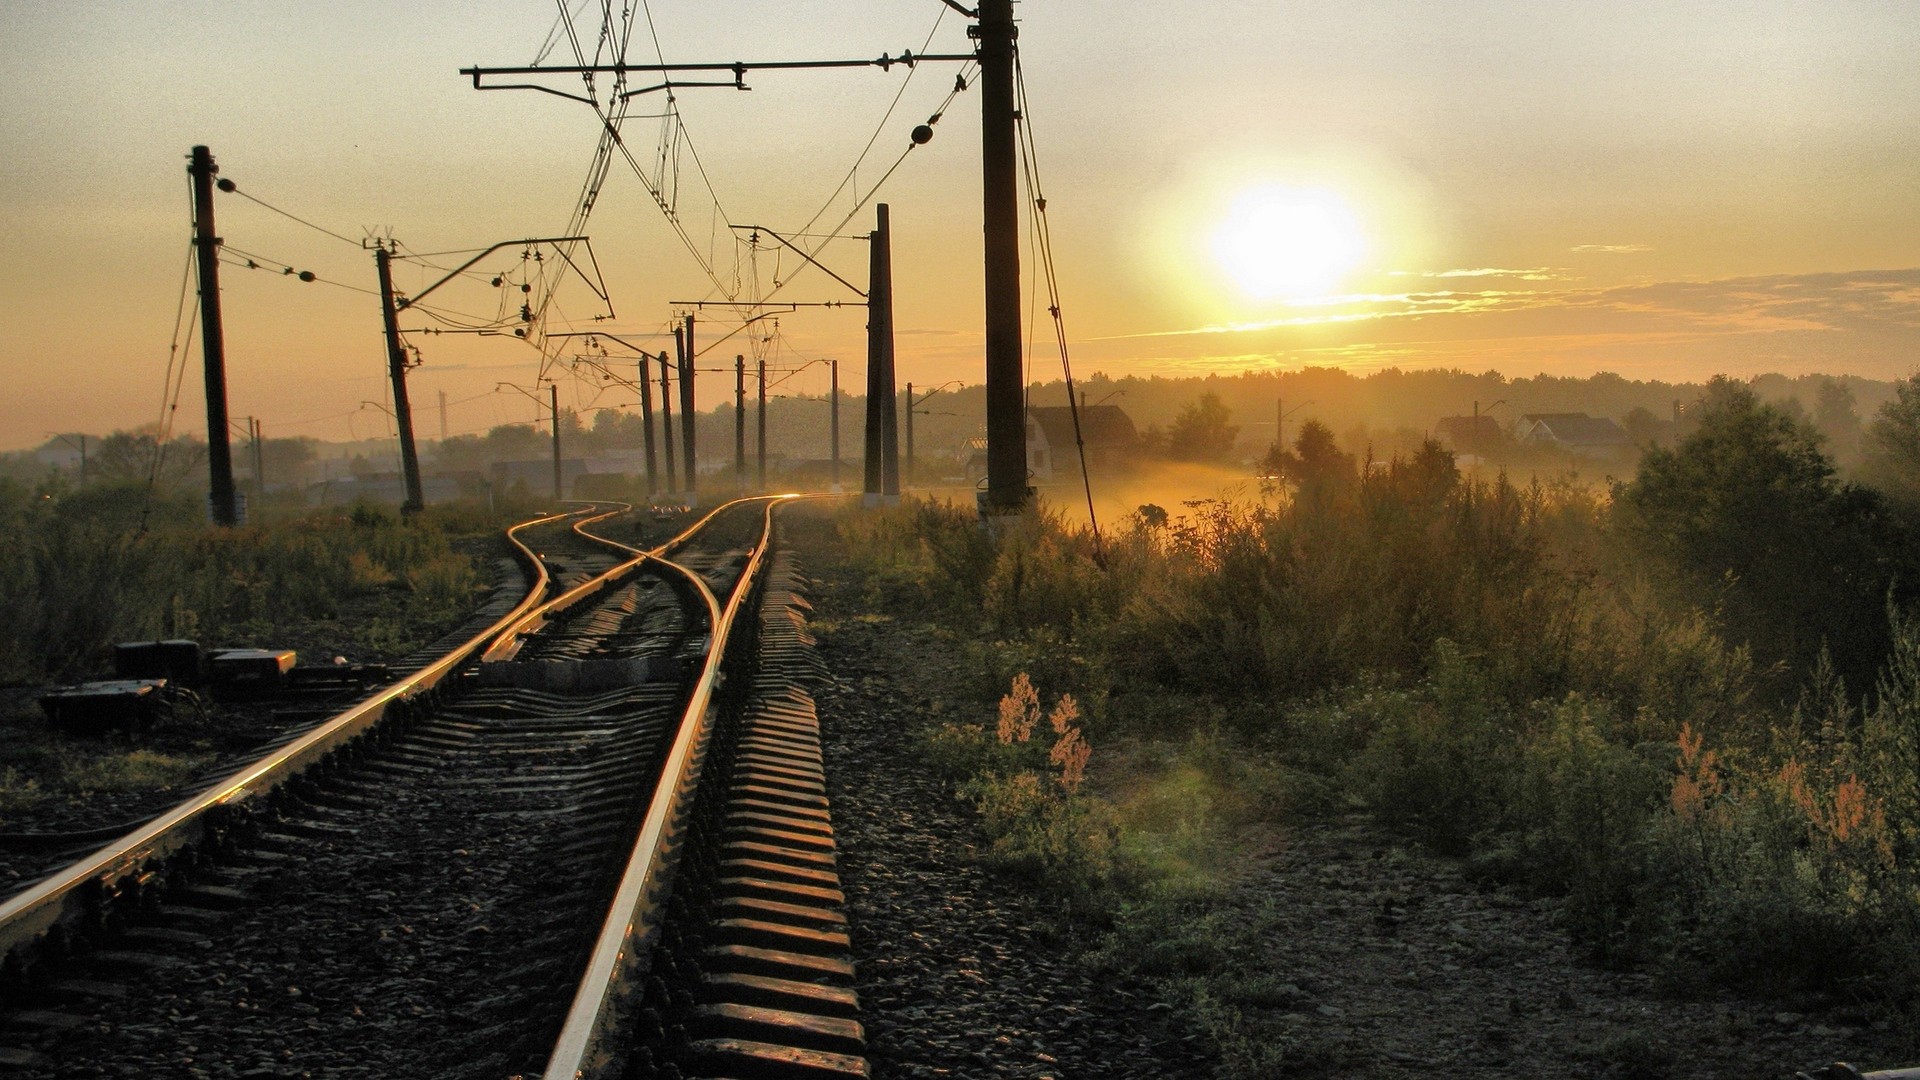 1920x1080 wallpapers: rails, sleepers, railway, path, poles, wires (image)